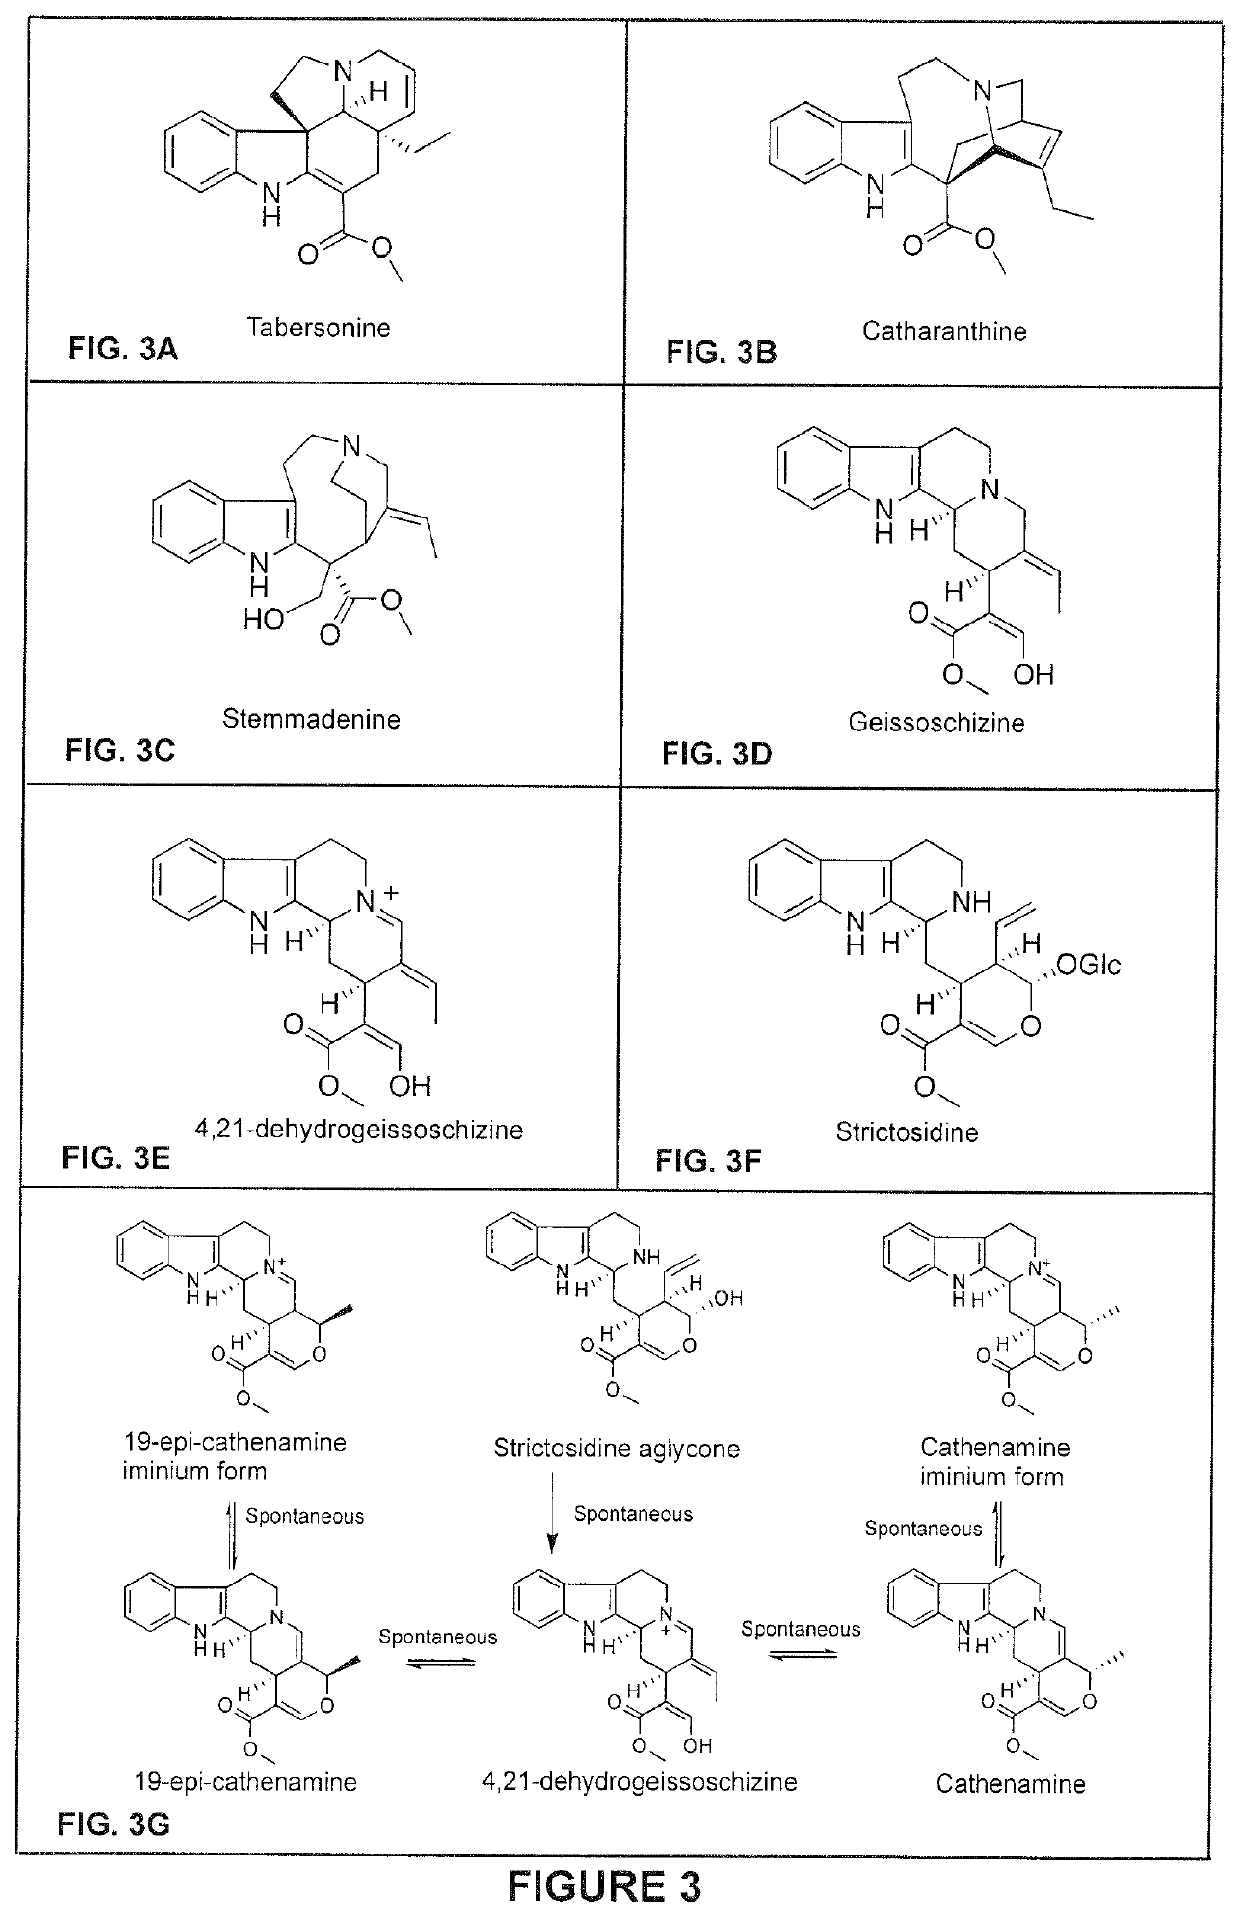 Compositions and methods for making terpenoid indole alkaloids